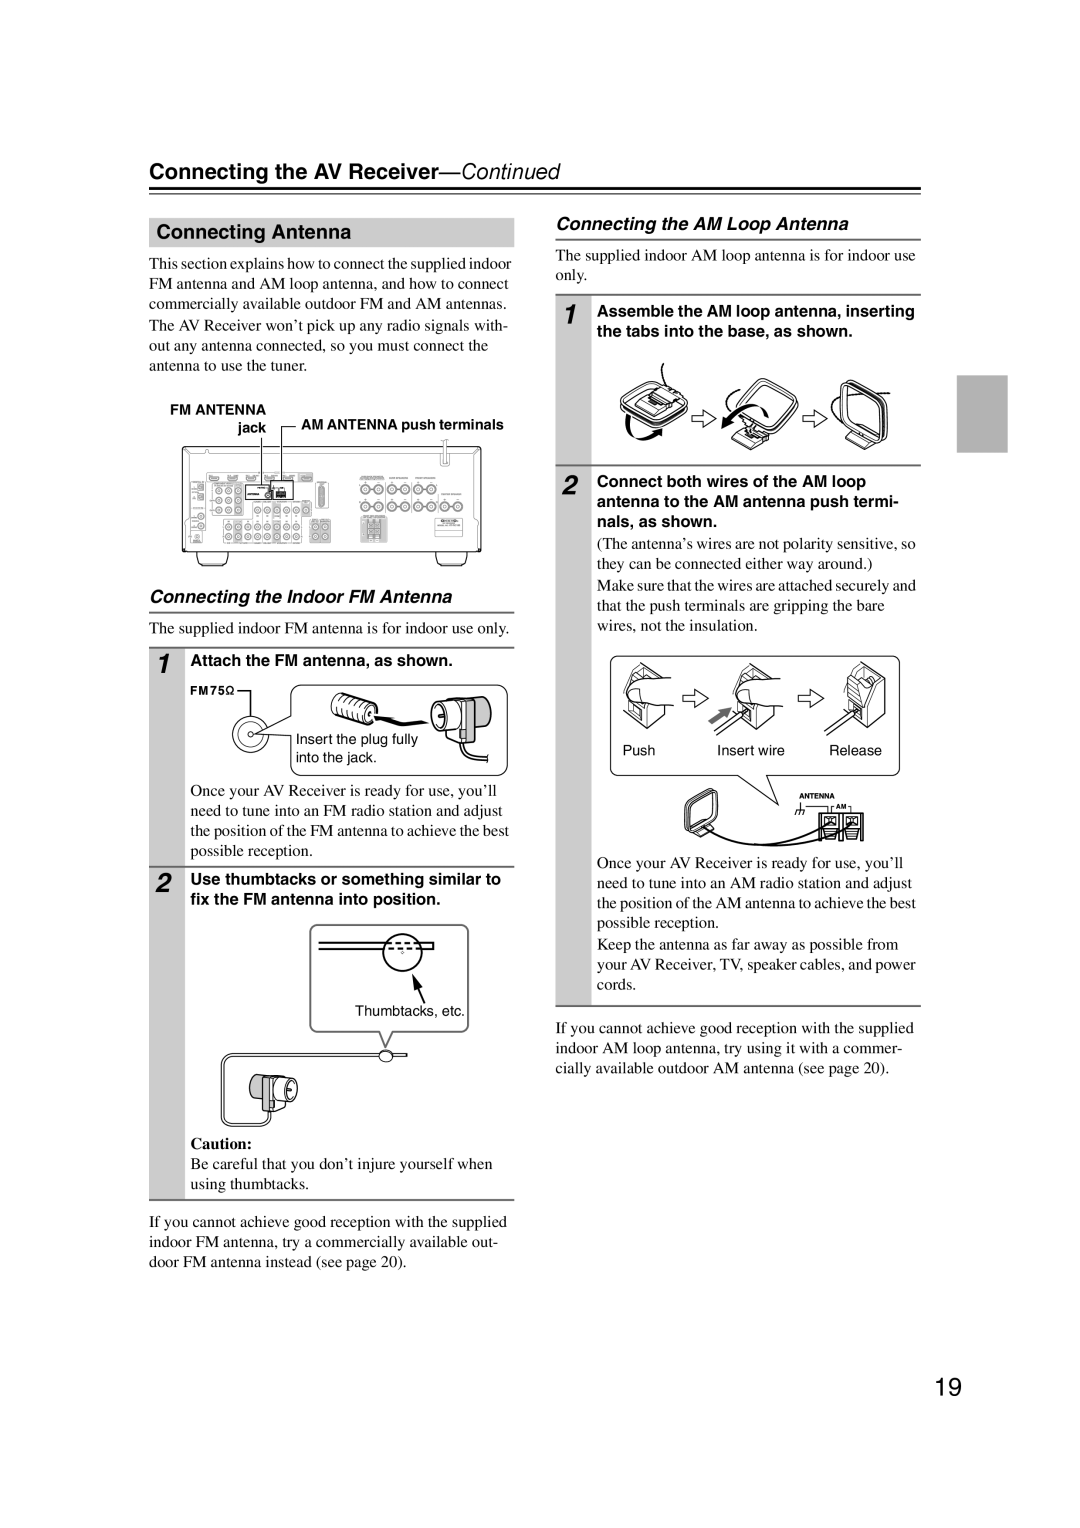 Onkyo HT-RC160 instruction manual Connecting Antenna, Connecting the Indoor FM Antenna, Connecting the AM Loop Antenna 